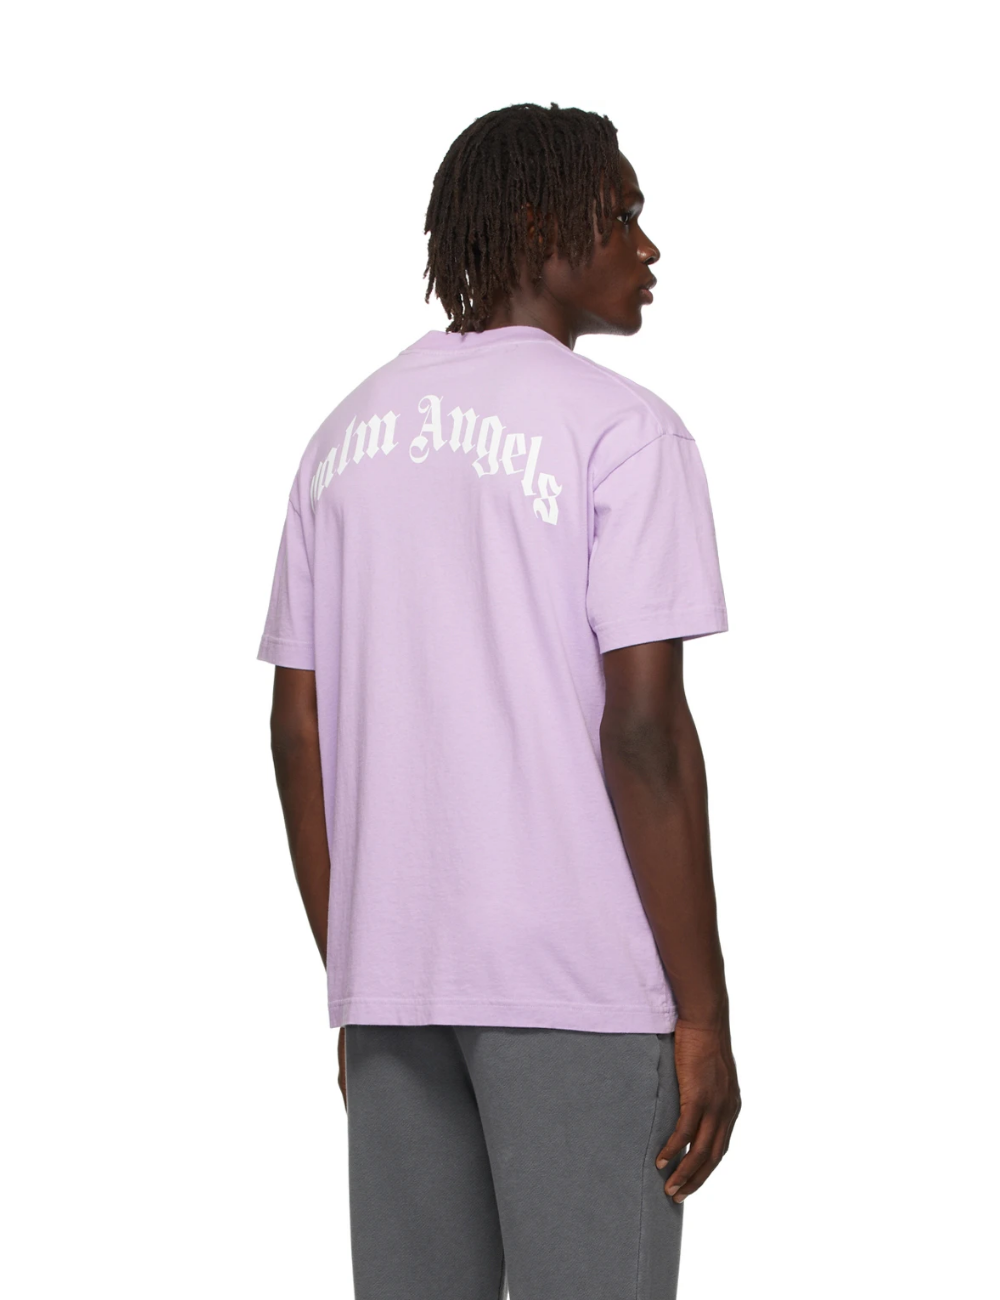 Palm Angels Kill The Bear SS2021 T-Shirt  (PURPLE) - Shop Streetwear, Sneakers, Slippers and Gifts online | Malaysia - The Factory KL